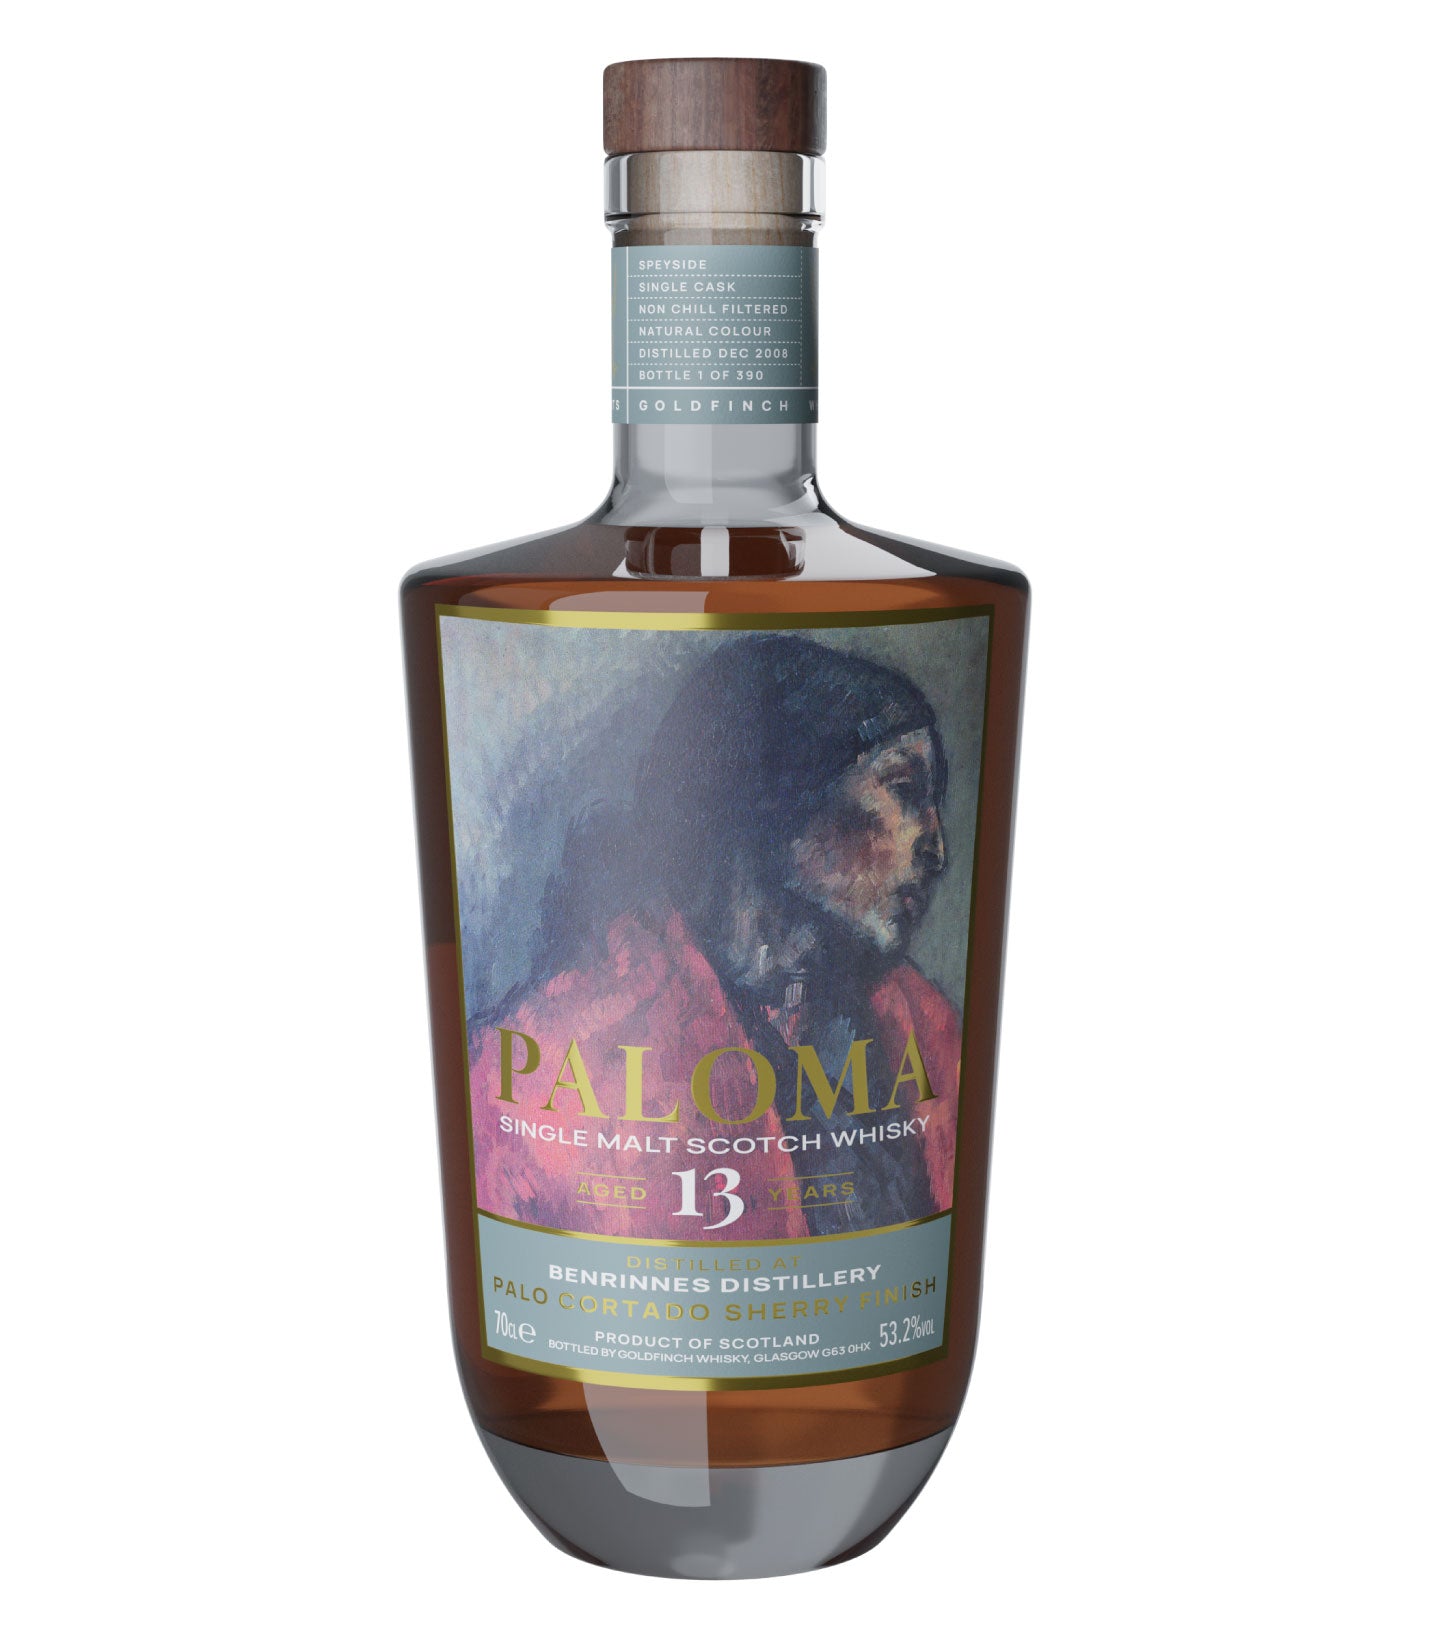 Goldfinch Paloma 13 Year Old Benrinnes Palo Cortado Sherry Finish (70cl, 53.2%)